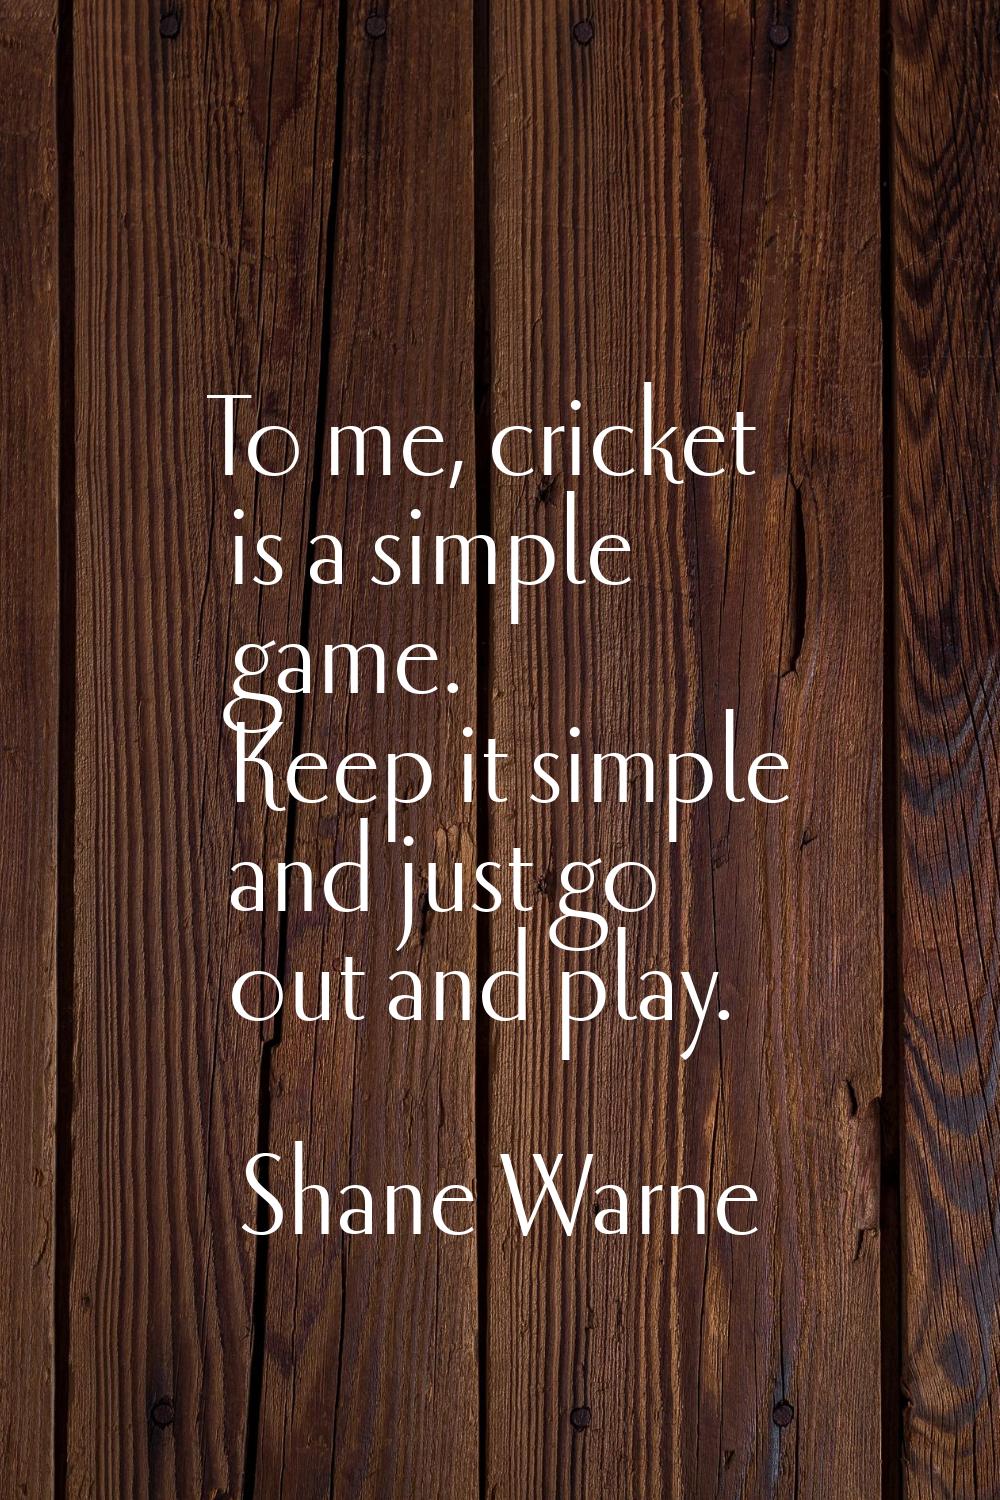 To me, cricket is a simple game. Keep it simple and just go out and play.